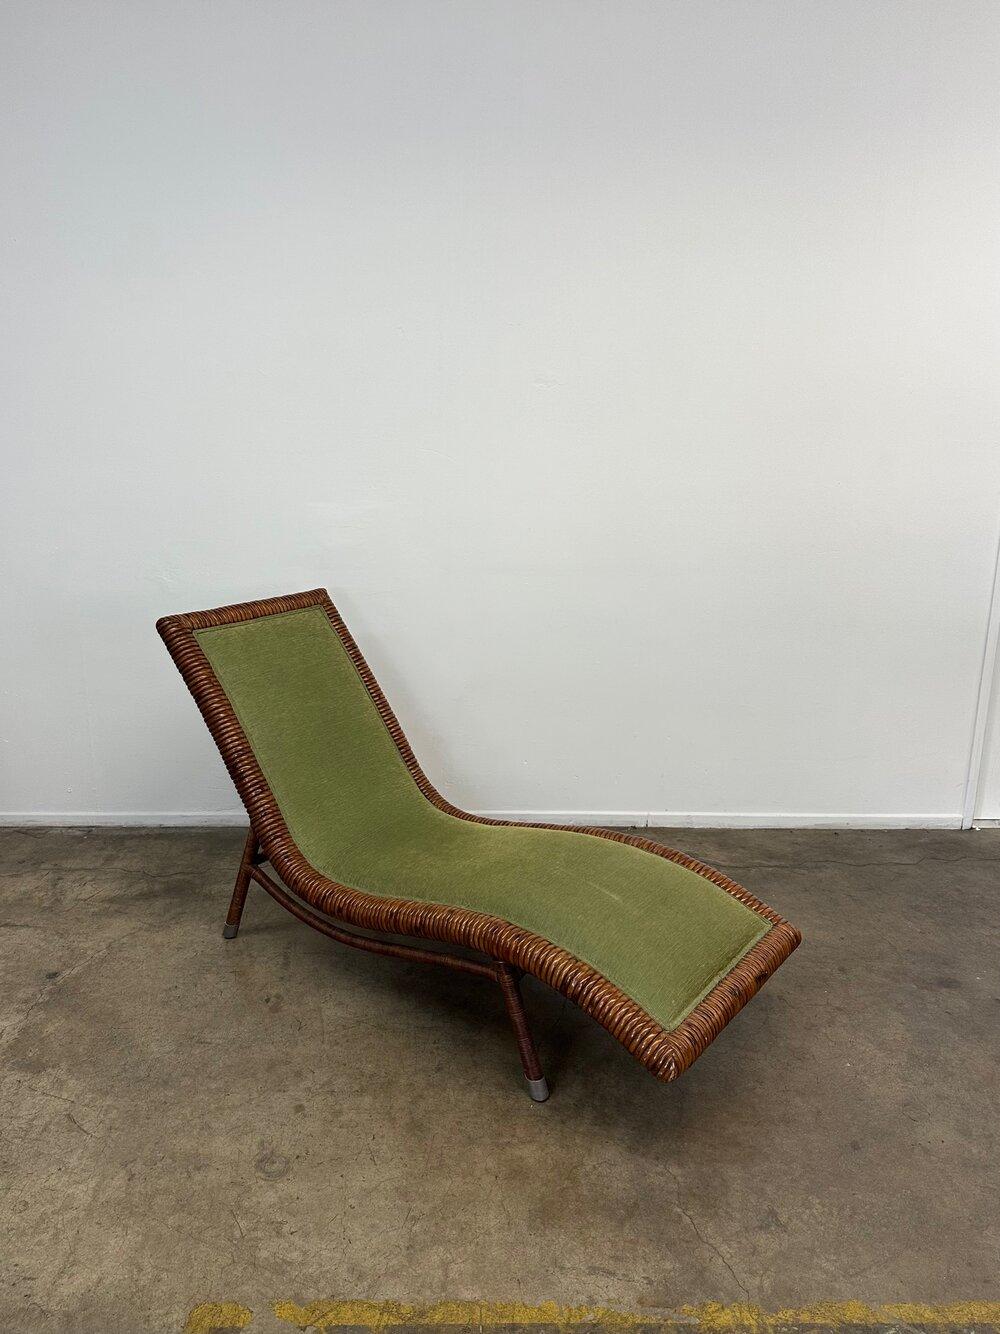 American Ribbed Rattan Chaise